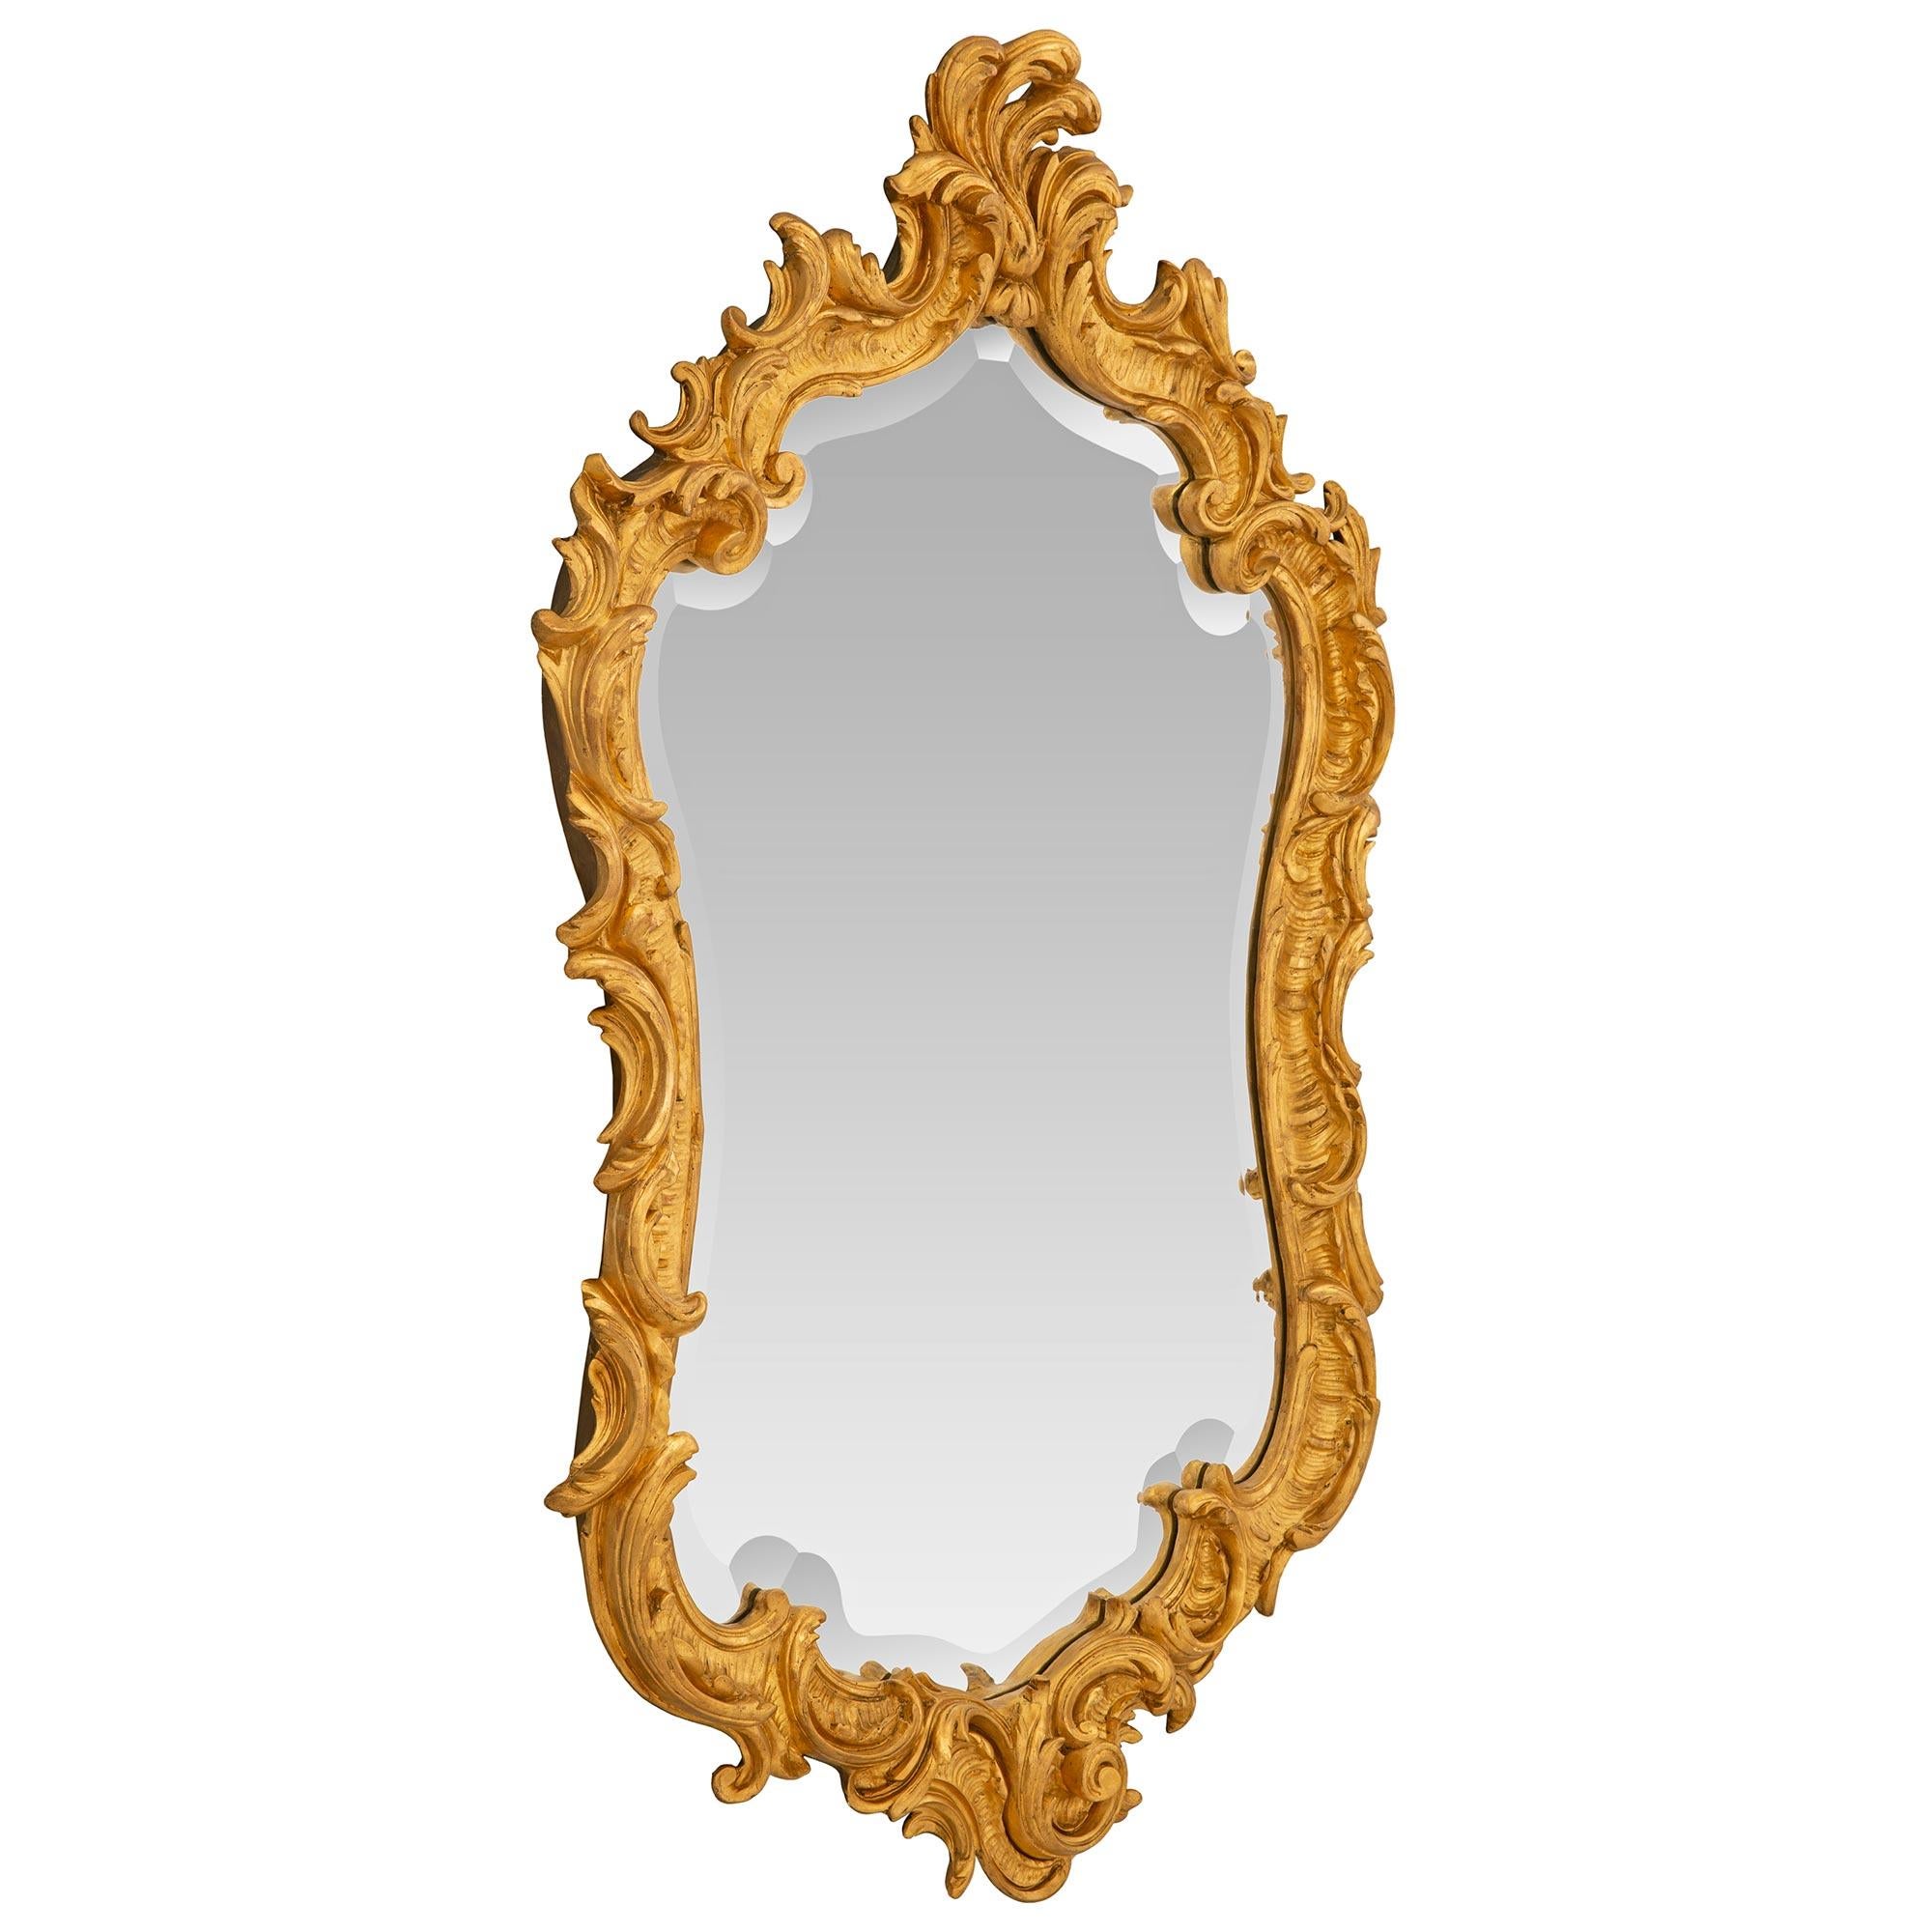 An outstanding Italian 19th century Louis XV st. giltwood mirror. The mirror retains its original beveled mirror plate set within the wonderful and most decorative giltwood frame. The frame displays stunning richly carved scrolled foliate designs